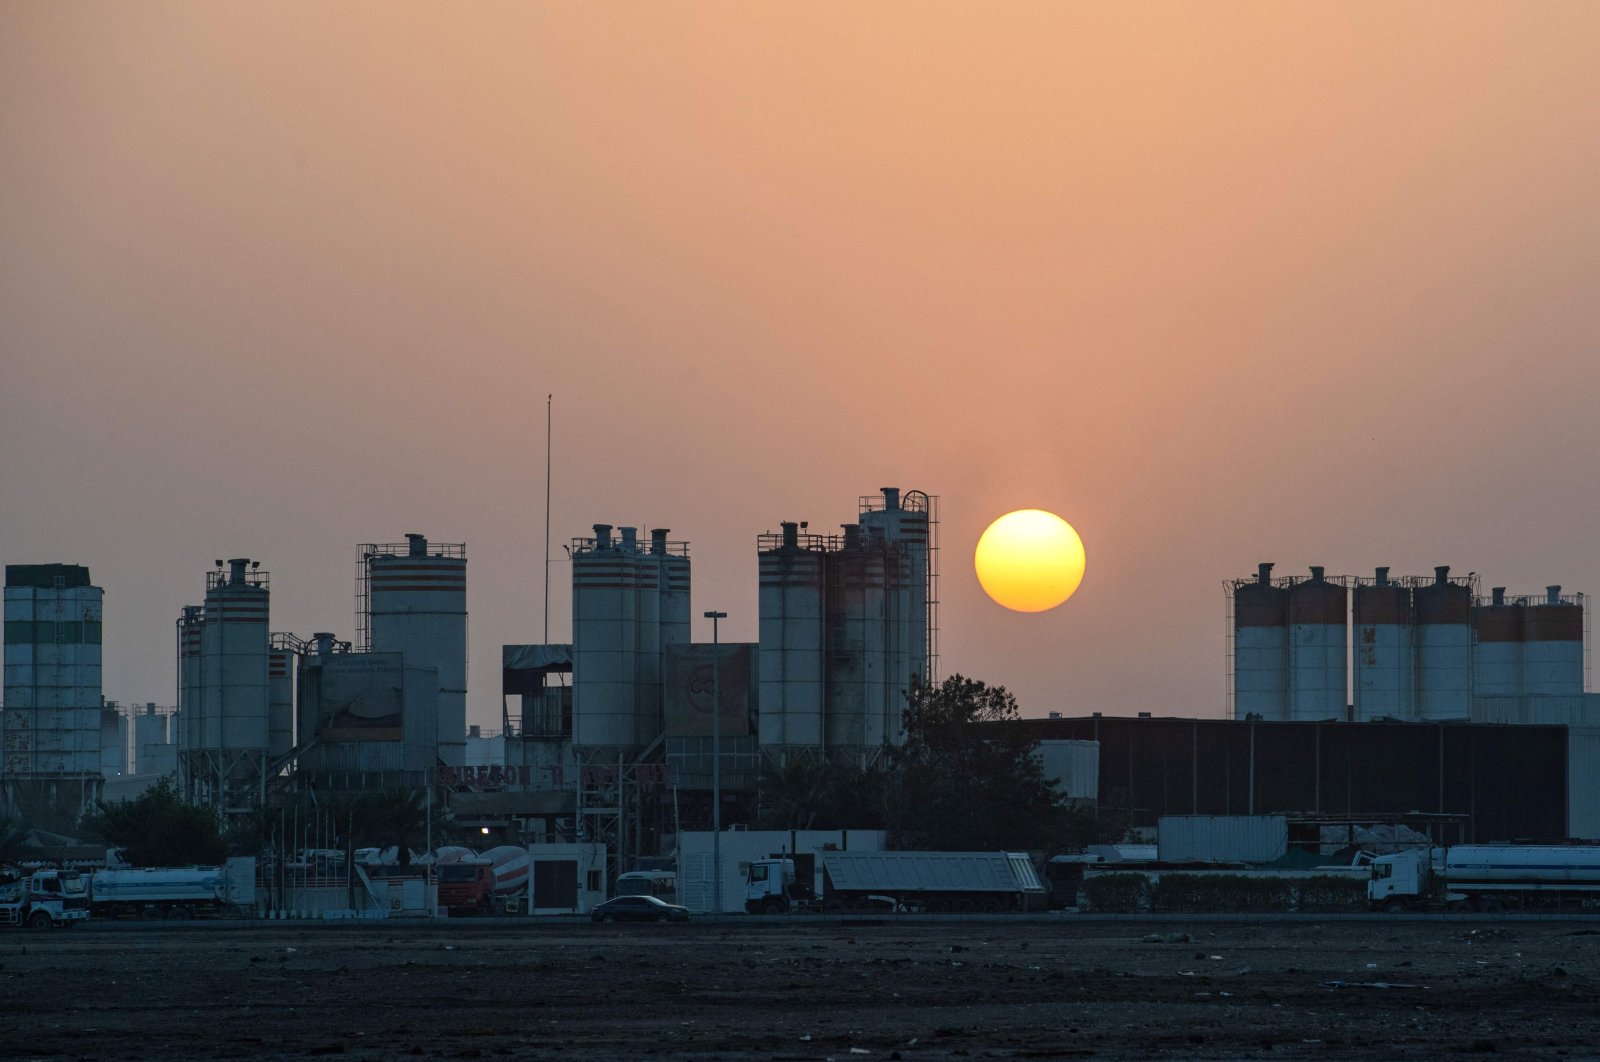 A picture shows a partial view of the Msaffah industrial district in the Emirati capital Abu Dhabi on Jan. 17, 2022. (AFP Photo)